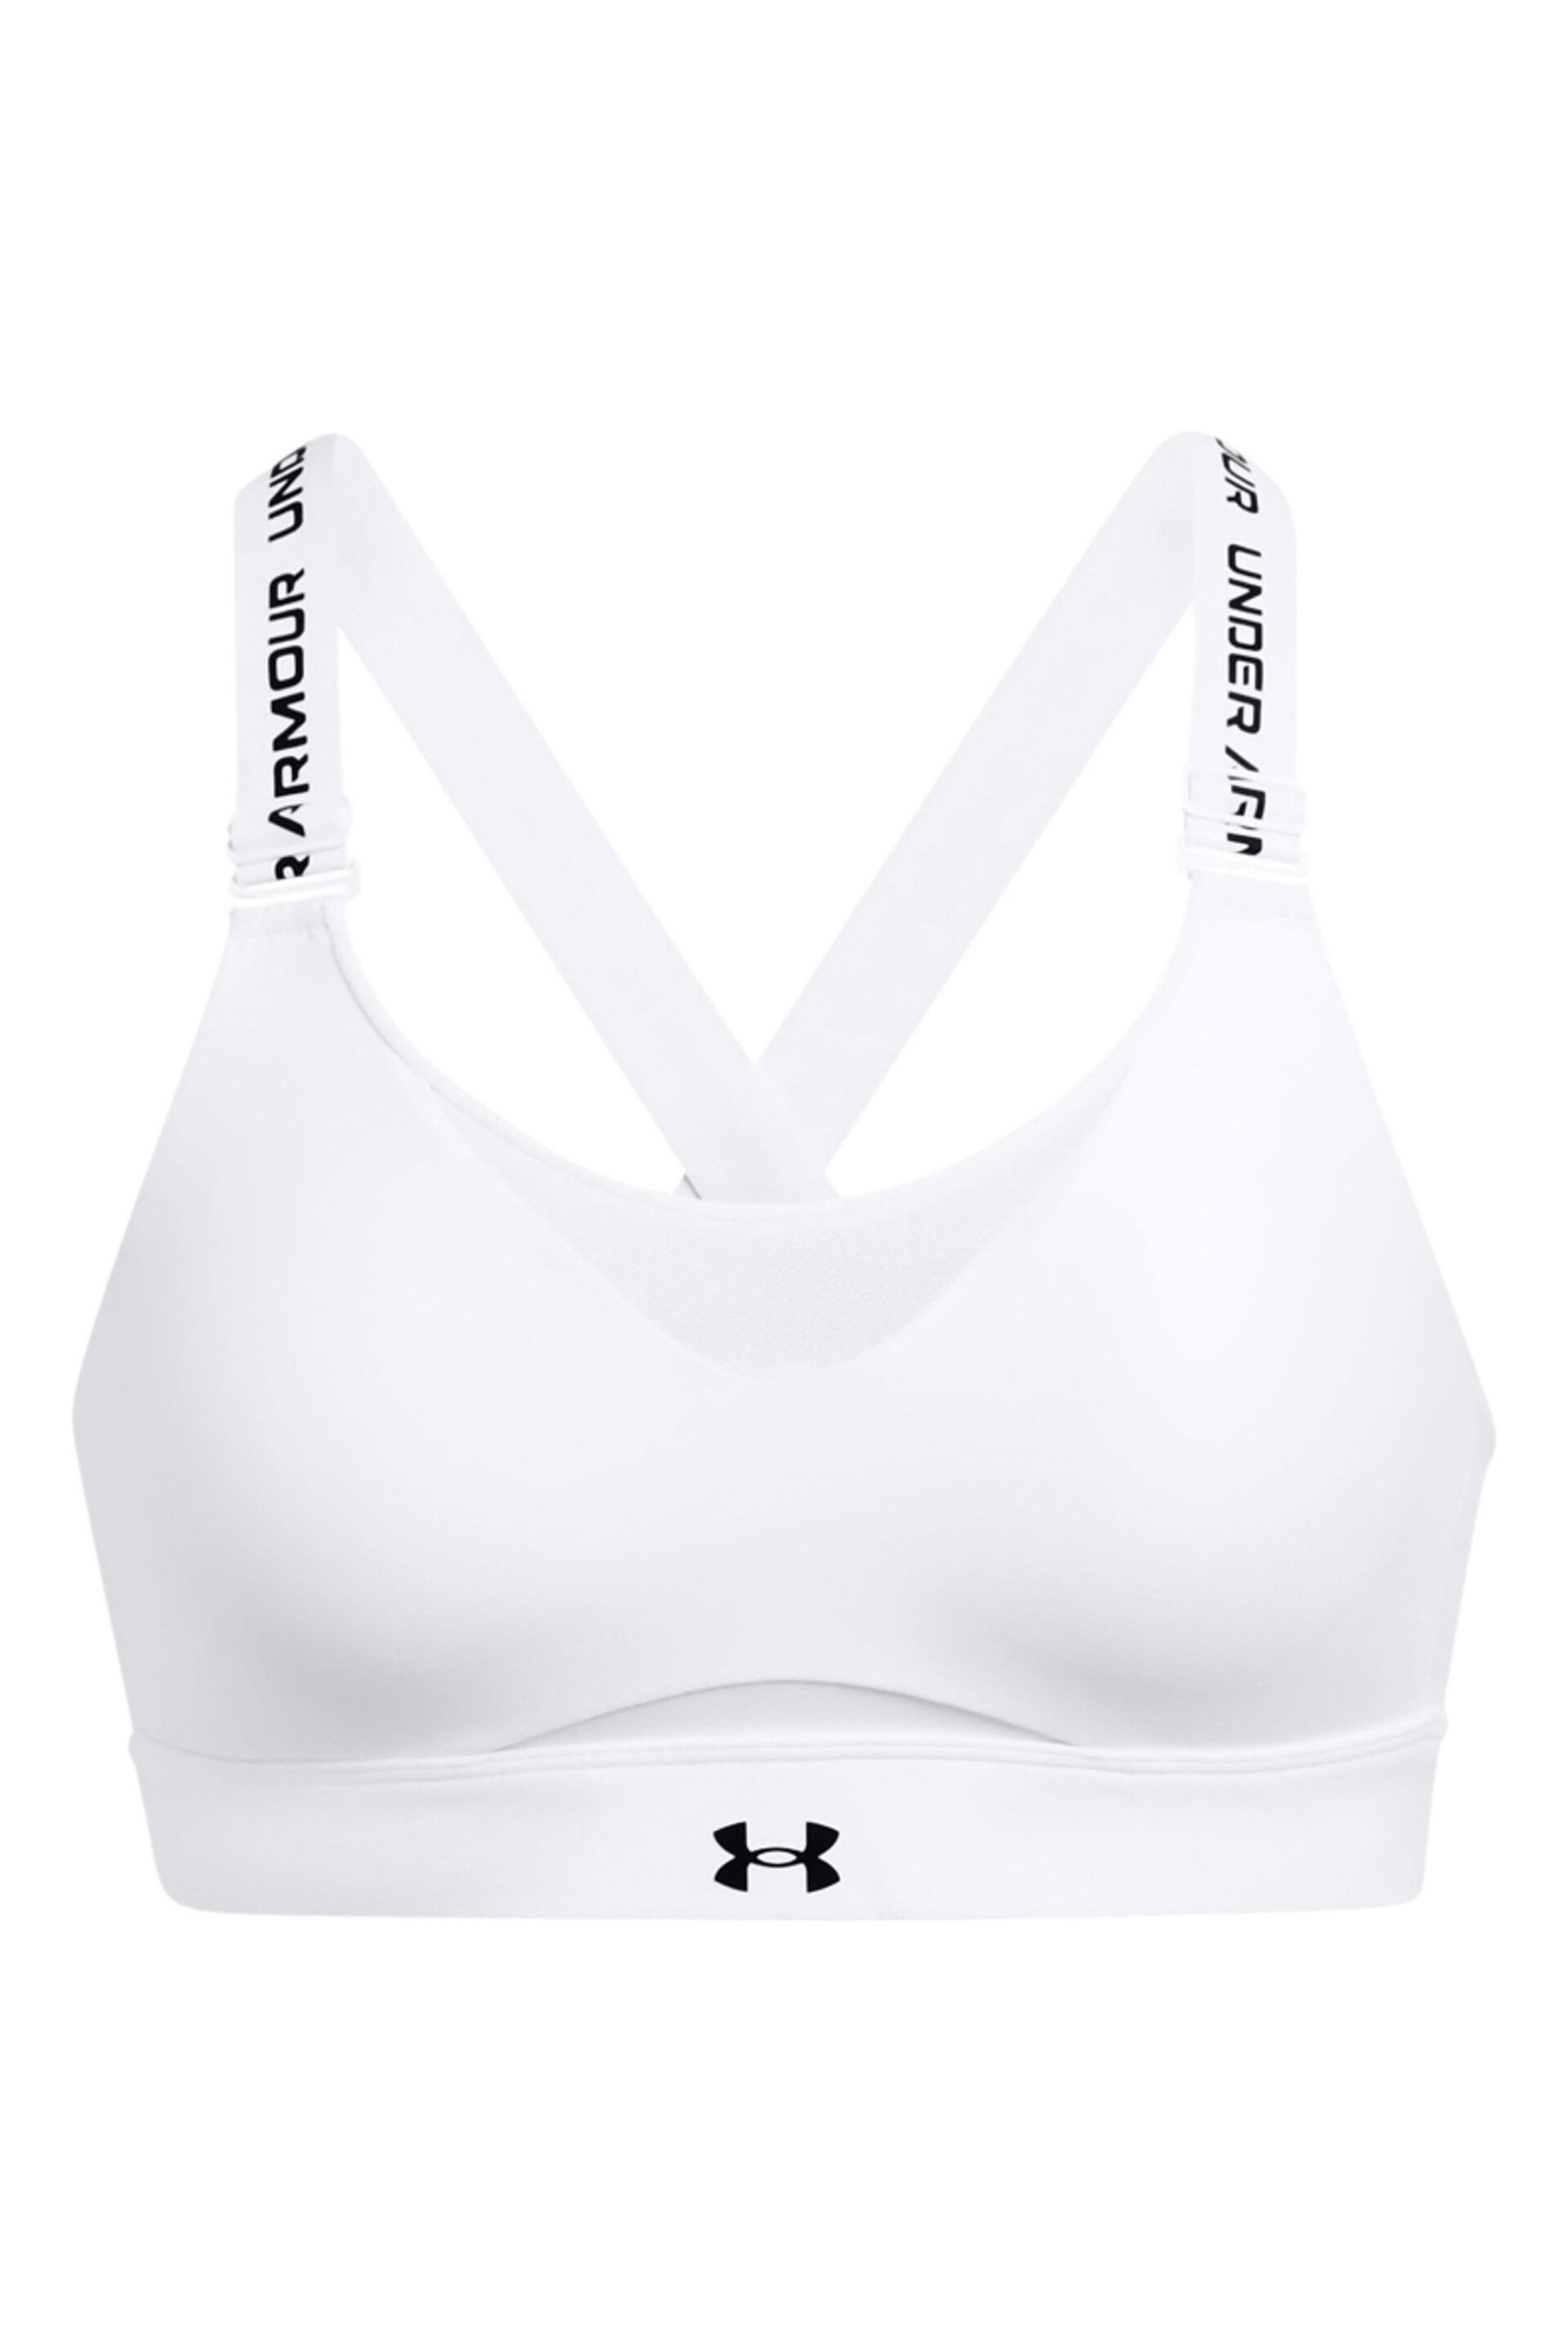 Under Armour White Infinity High Support Bra - Image 3 of 5